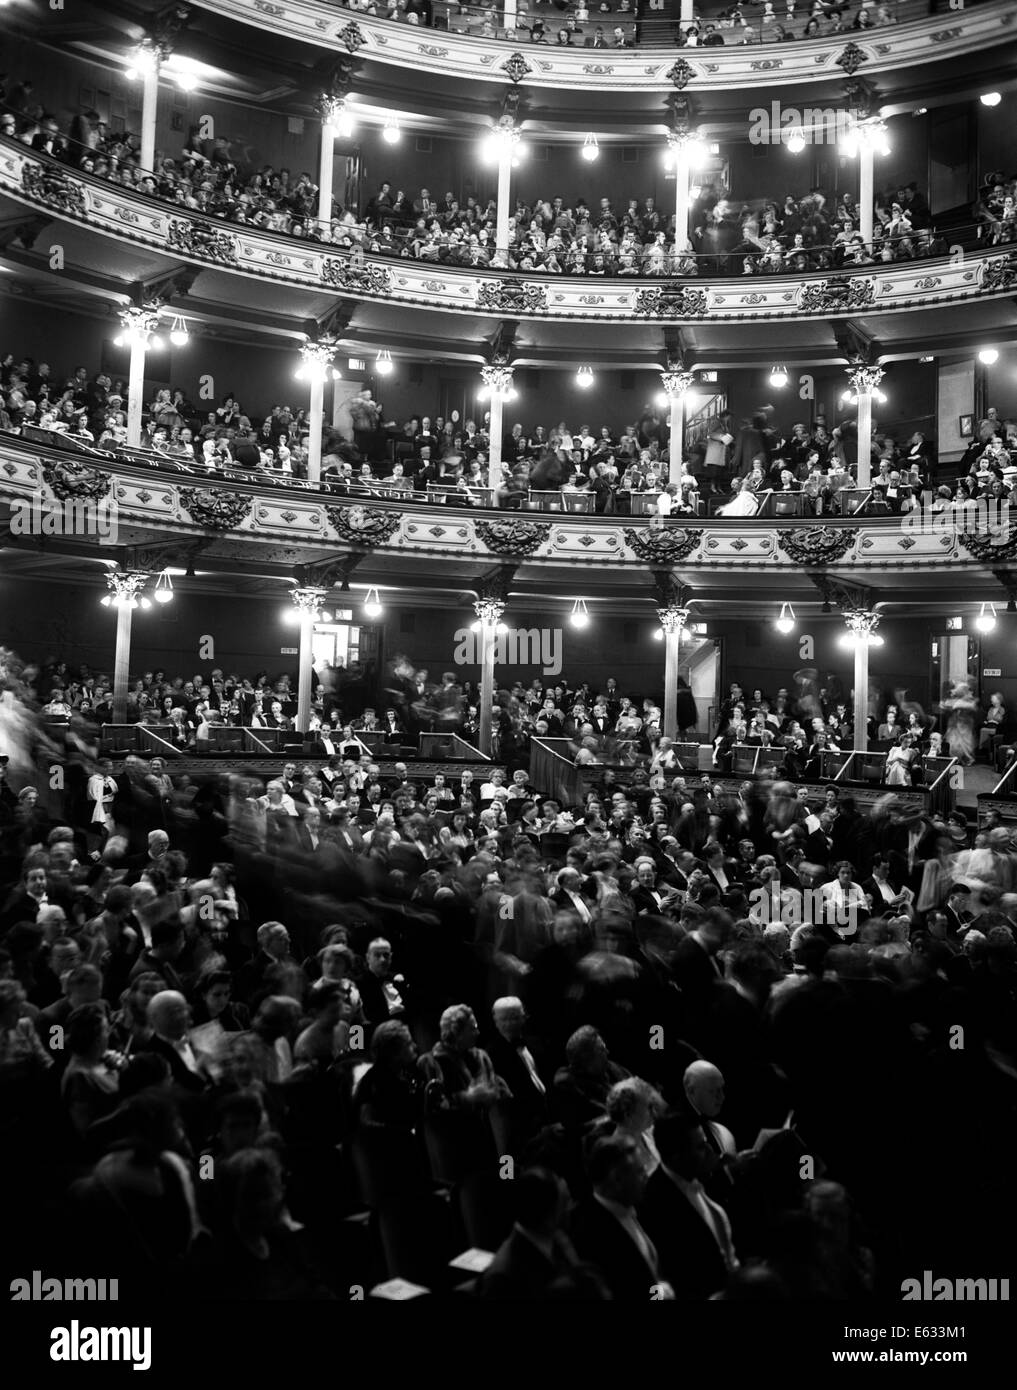 1960s AUDIENCE IN SEATS AND BALCONIES OF THE ACADEMY OF MUSIC PHILADELPHIA PENNSYLVANIA USA Stock Photo